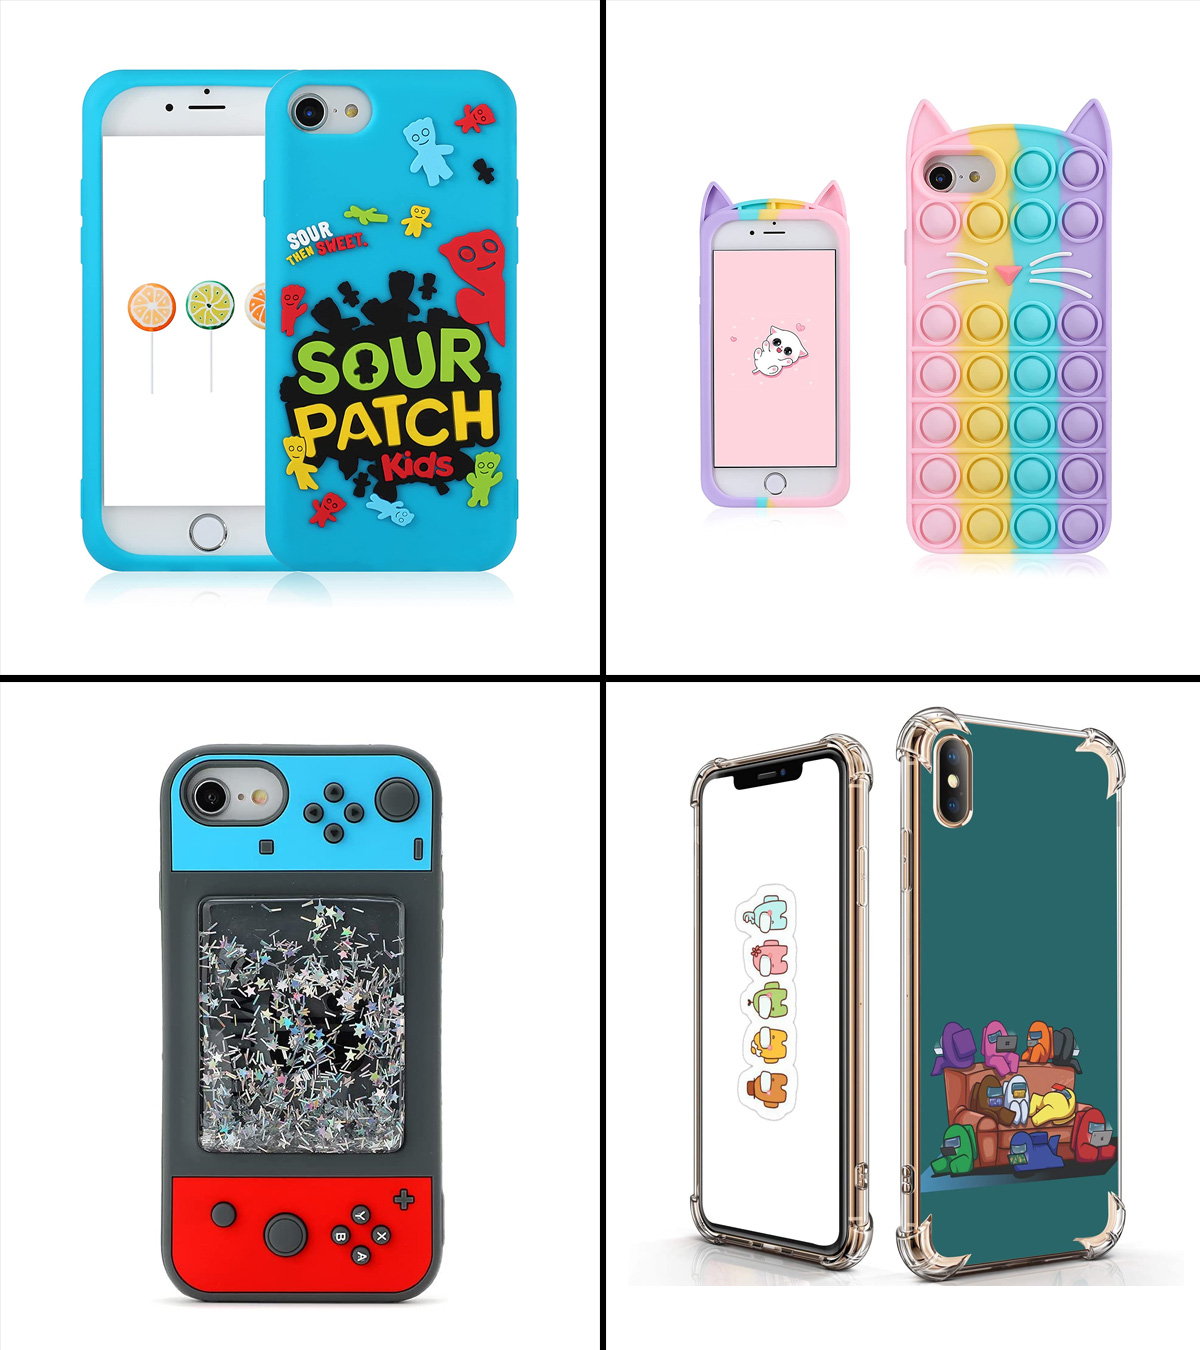 10 Best iPhone Cases For Kids To Protect Phone From Damage, 2023